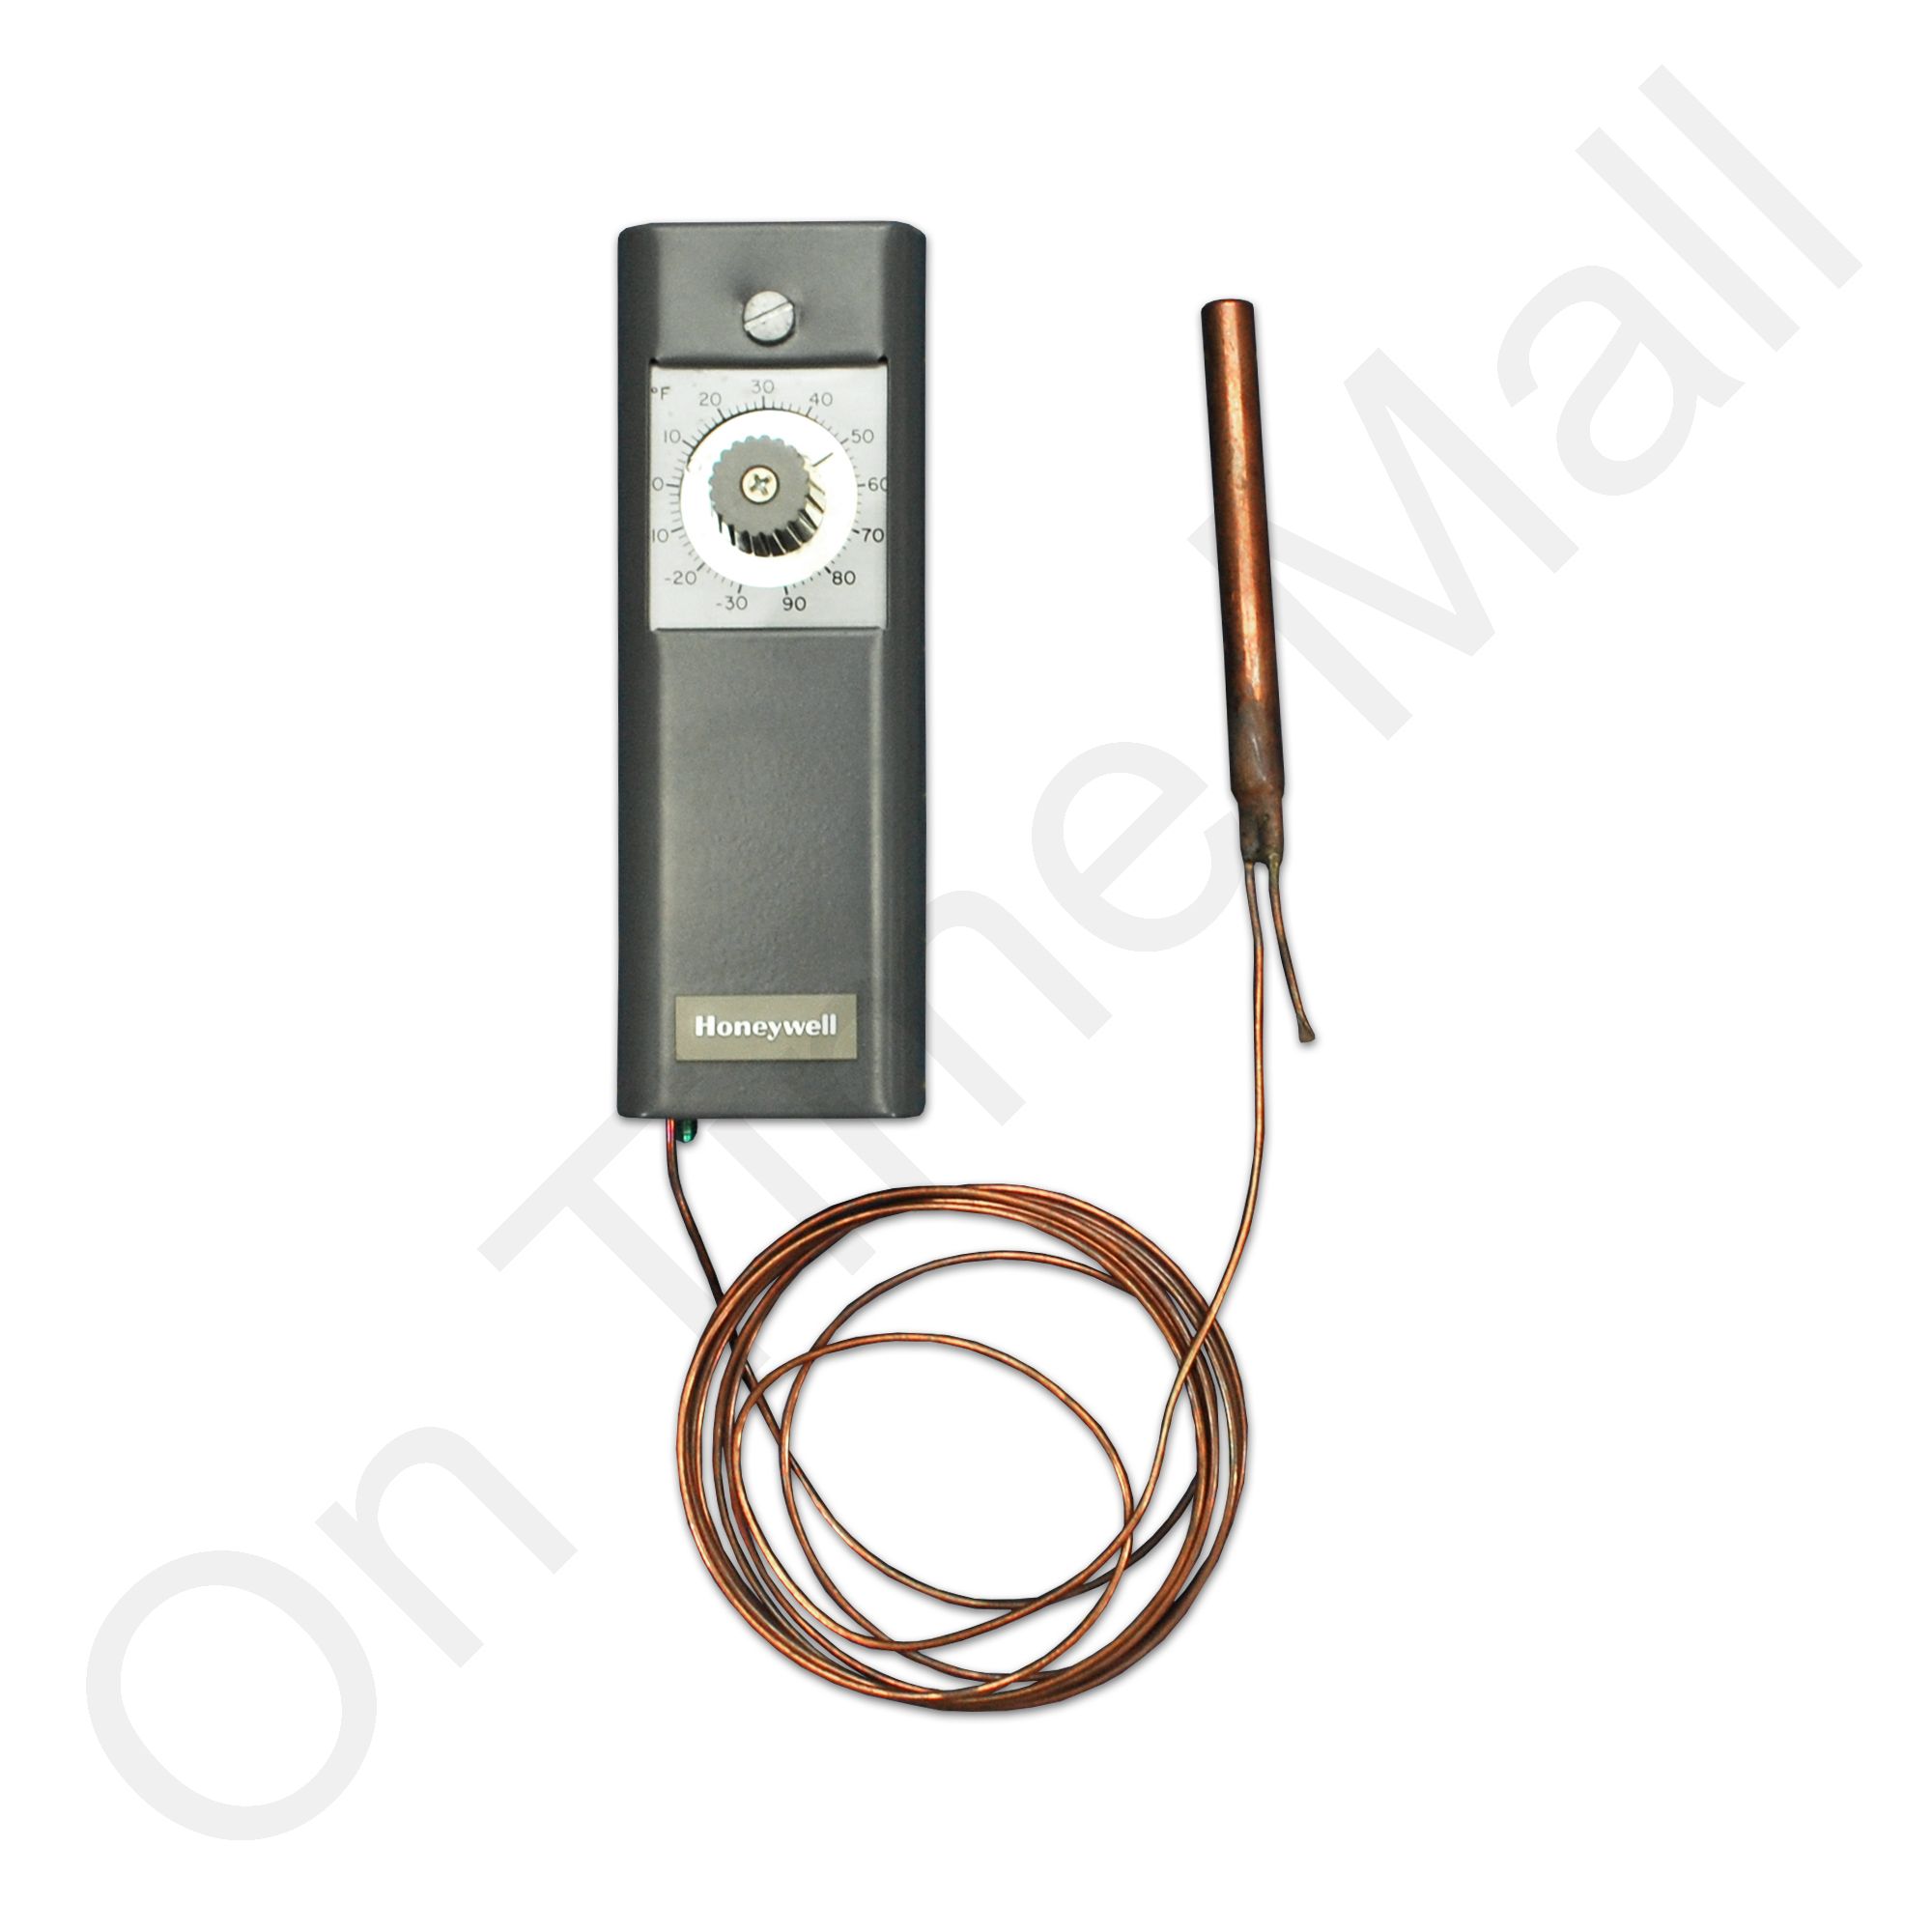 Honeywell T678A1361 Insertion thermostat 2 Stg Switch Control Range 55 To 20 Ft Copper Element 200F Max Temp Of Element